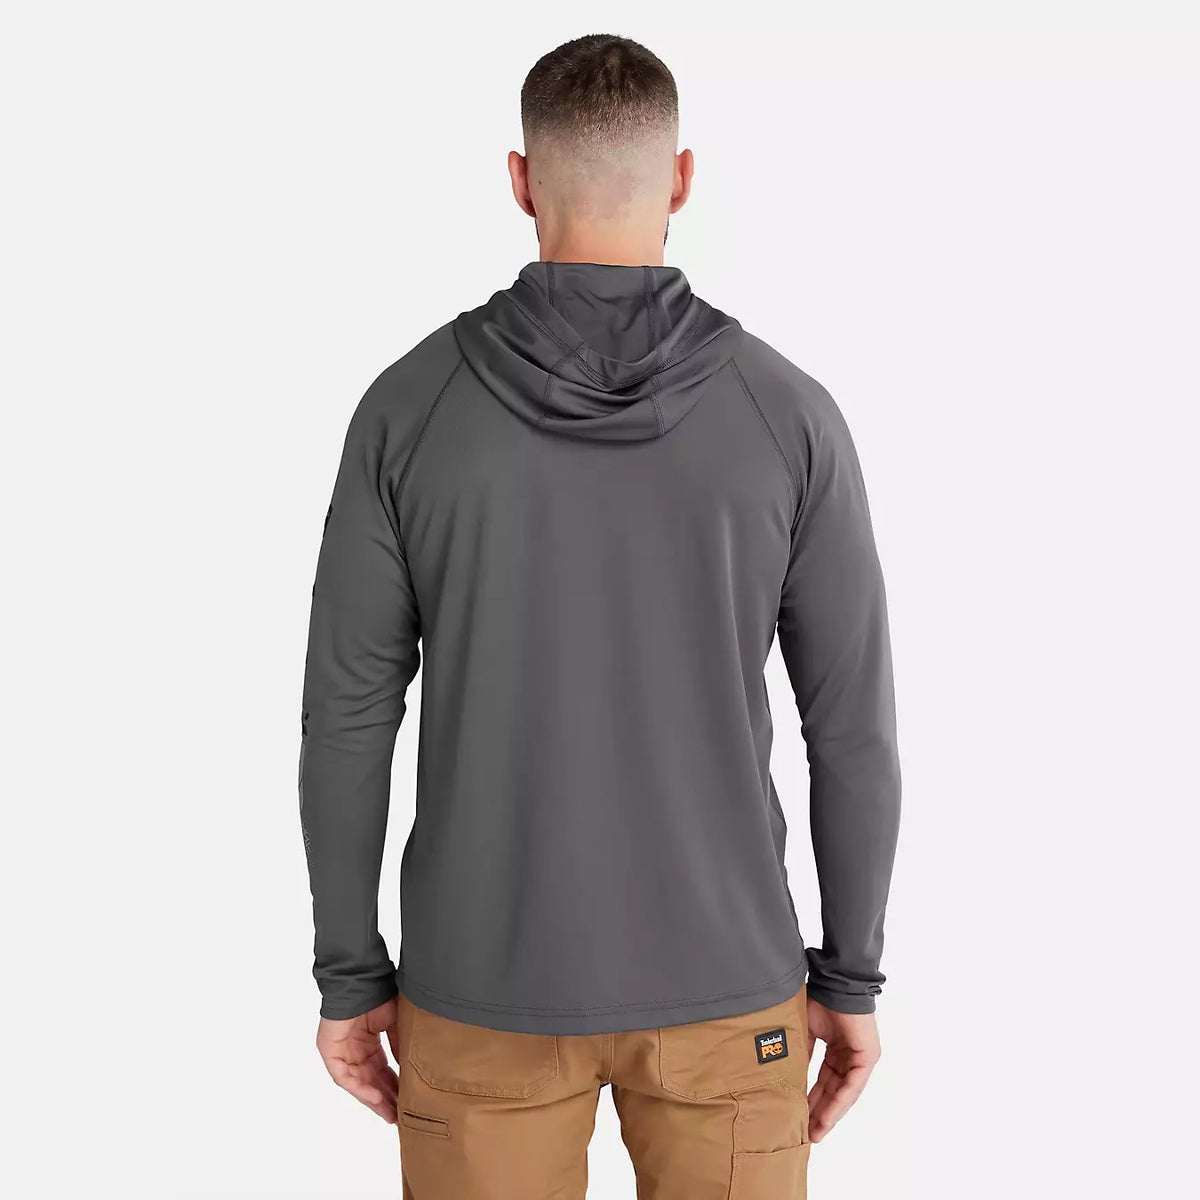 Timberland PRO Wicking Good Pullover Hoodie - Work World - Workwear, Work Boots, Safety Gear